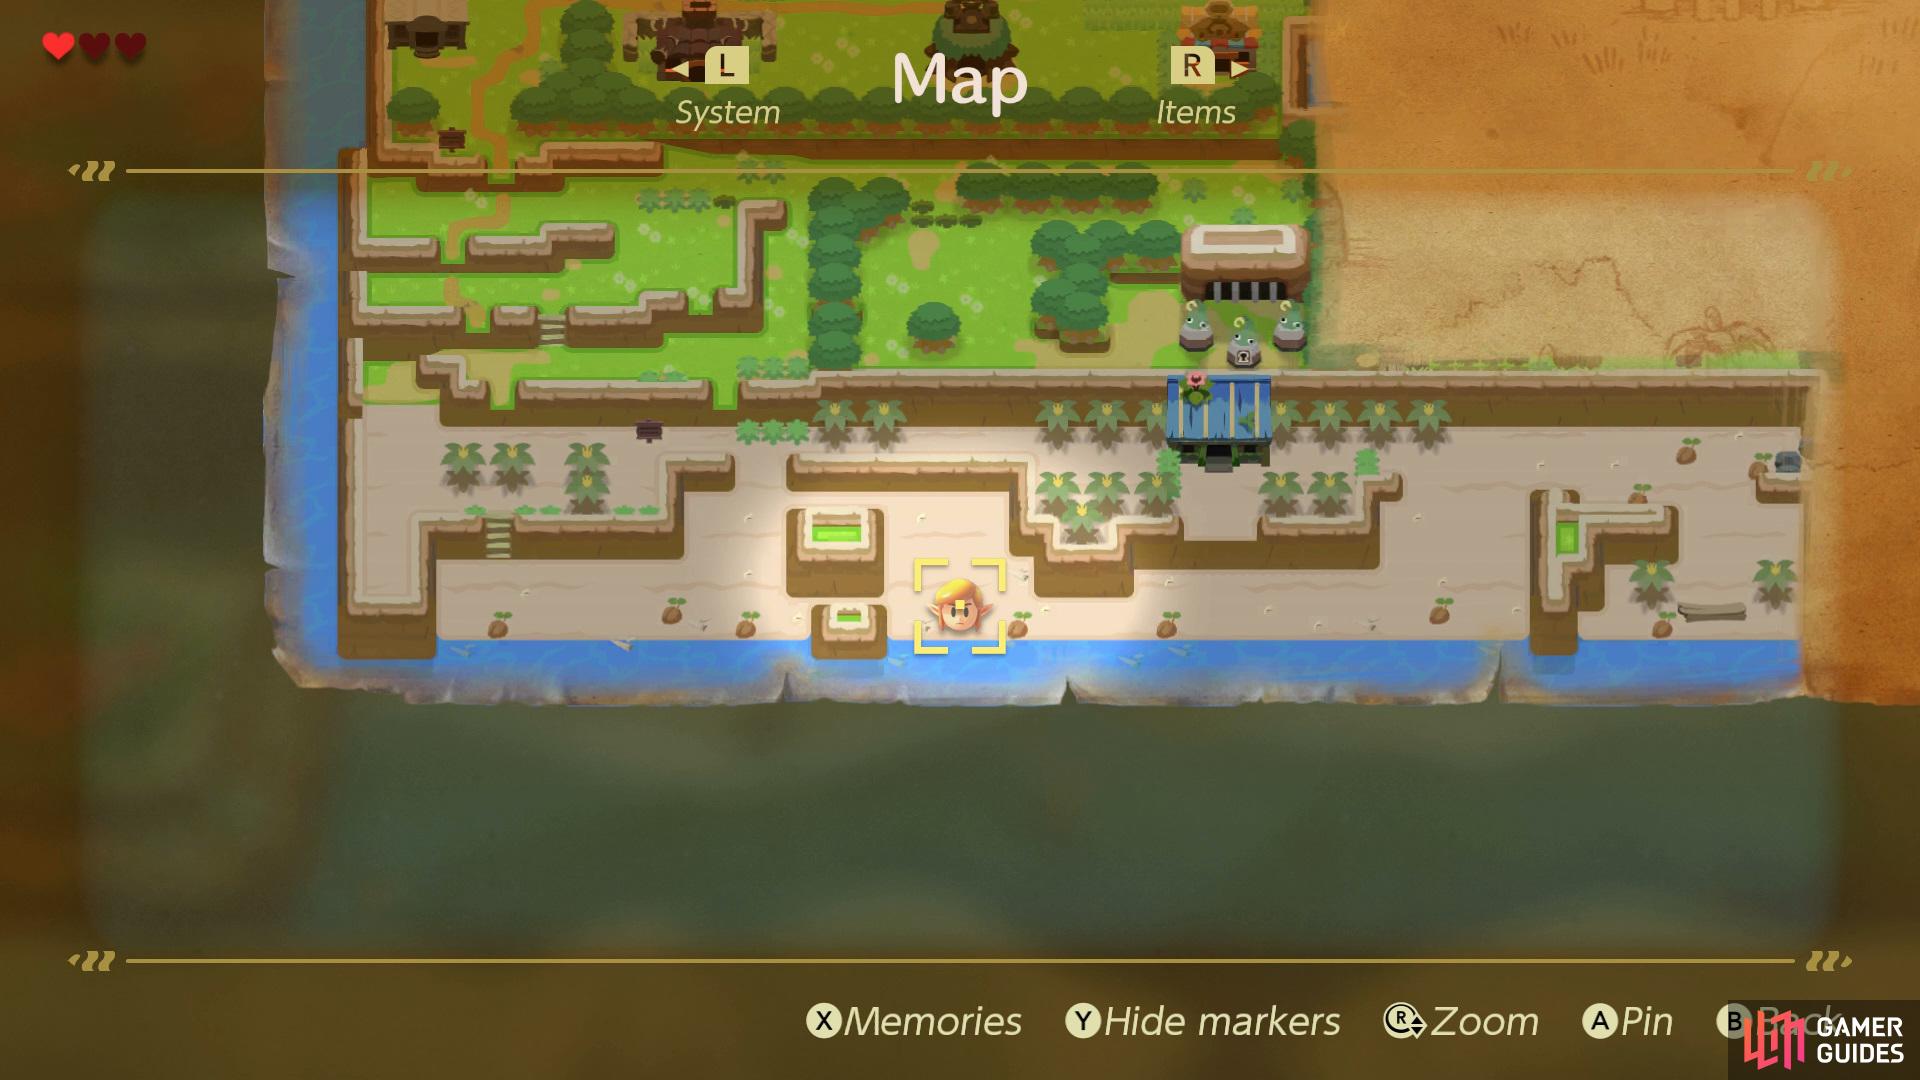 Head over to this location on the map to find Link's Sword,